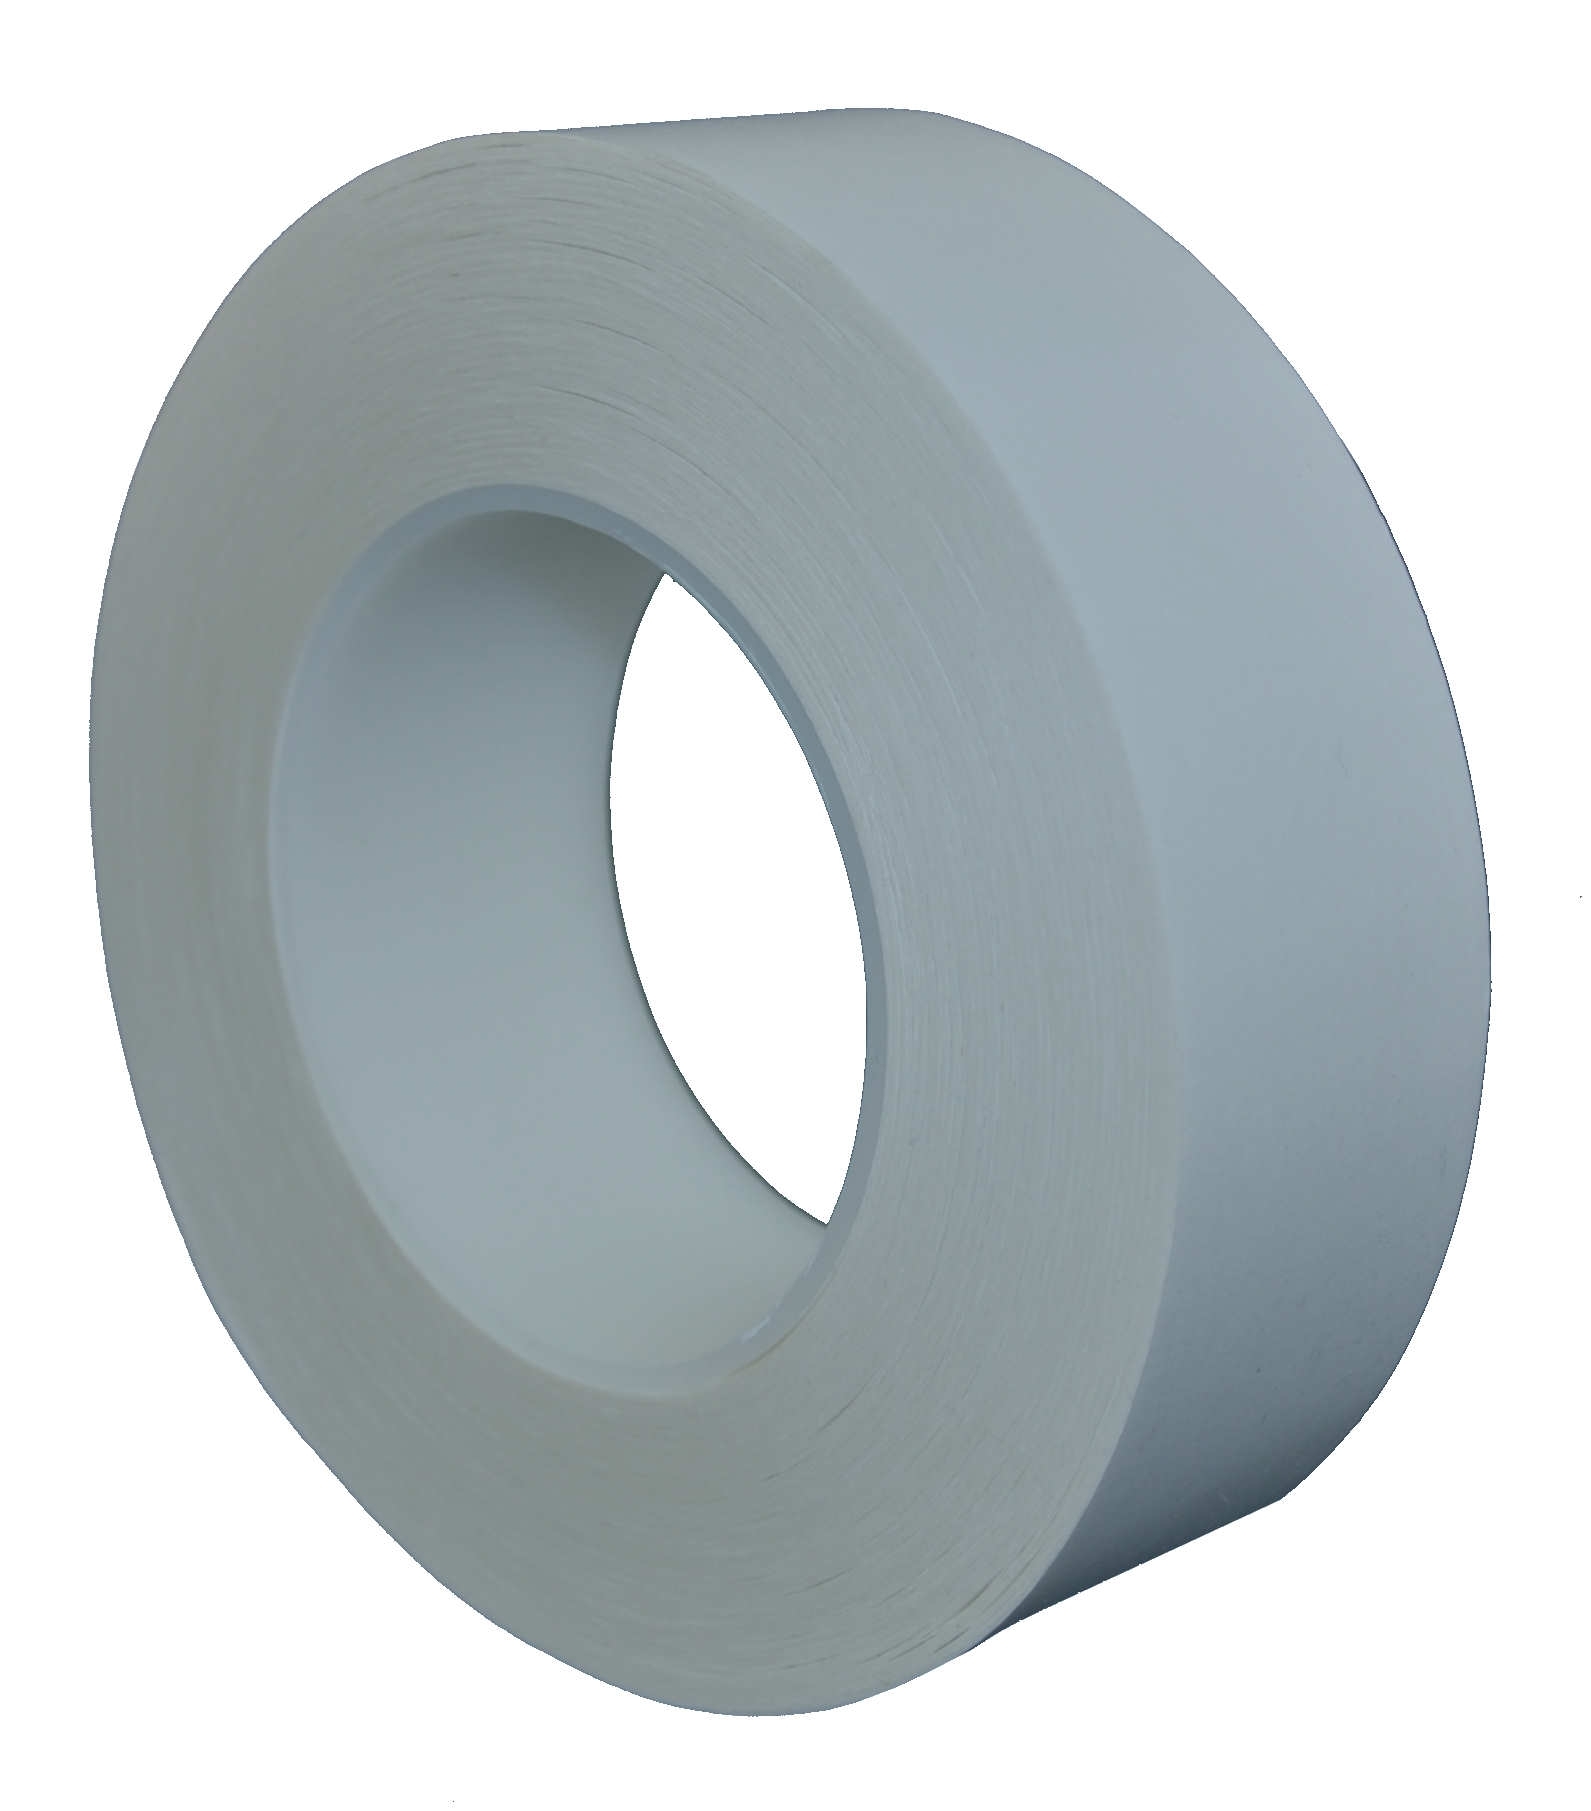 S-K-S dubbelzijdig plakband met polyester drager 480, transparant, 9 mm x 50 m, 0,09 mm